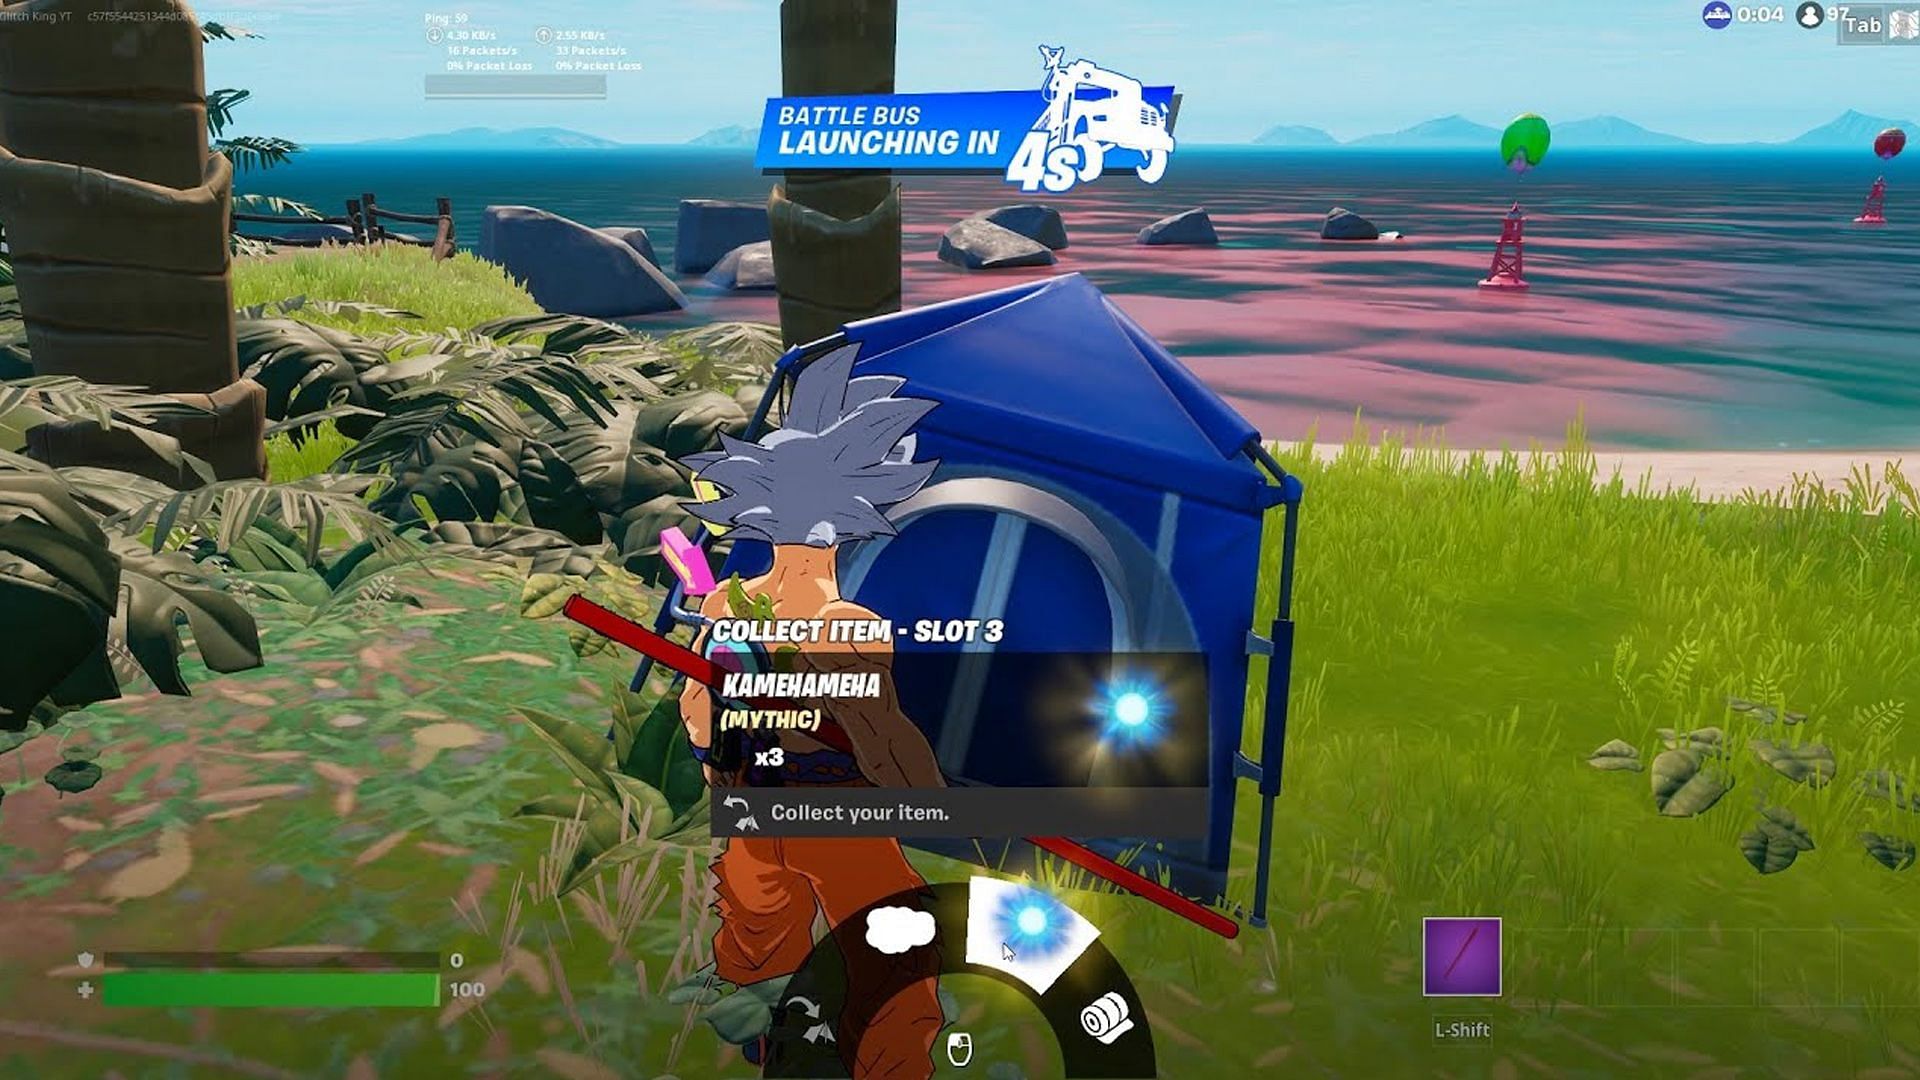 New Fortnite glitch allows players to become invisible (Image via Epic Games)